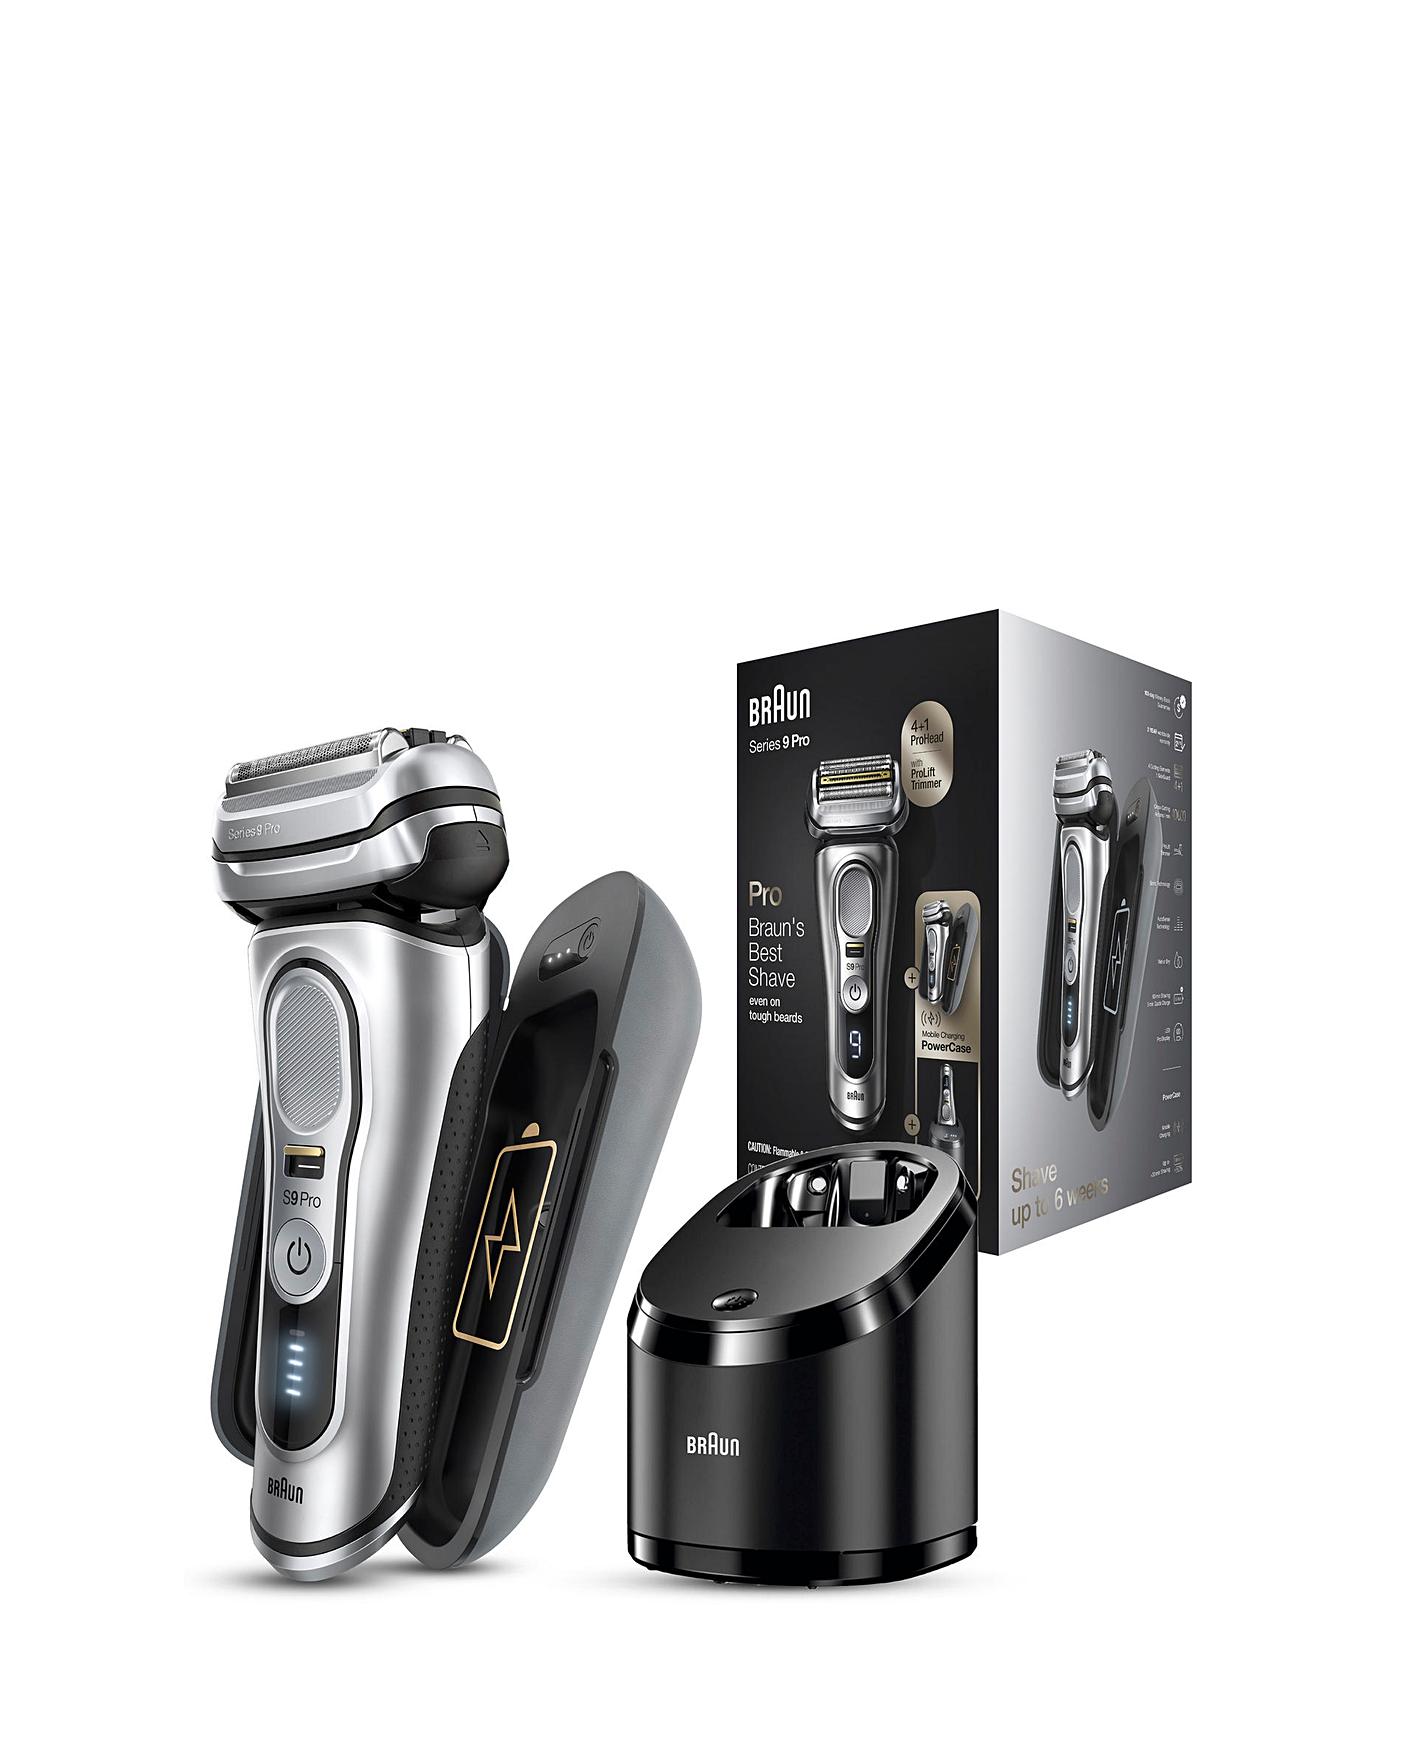 New Braun Series 9 Pro+ Wet & Dry Electric Shaver With 6-In-1 Smartcare  Centre 